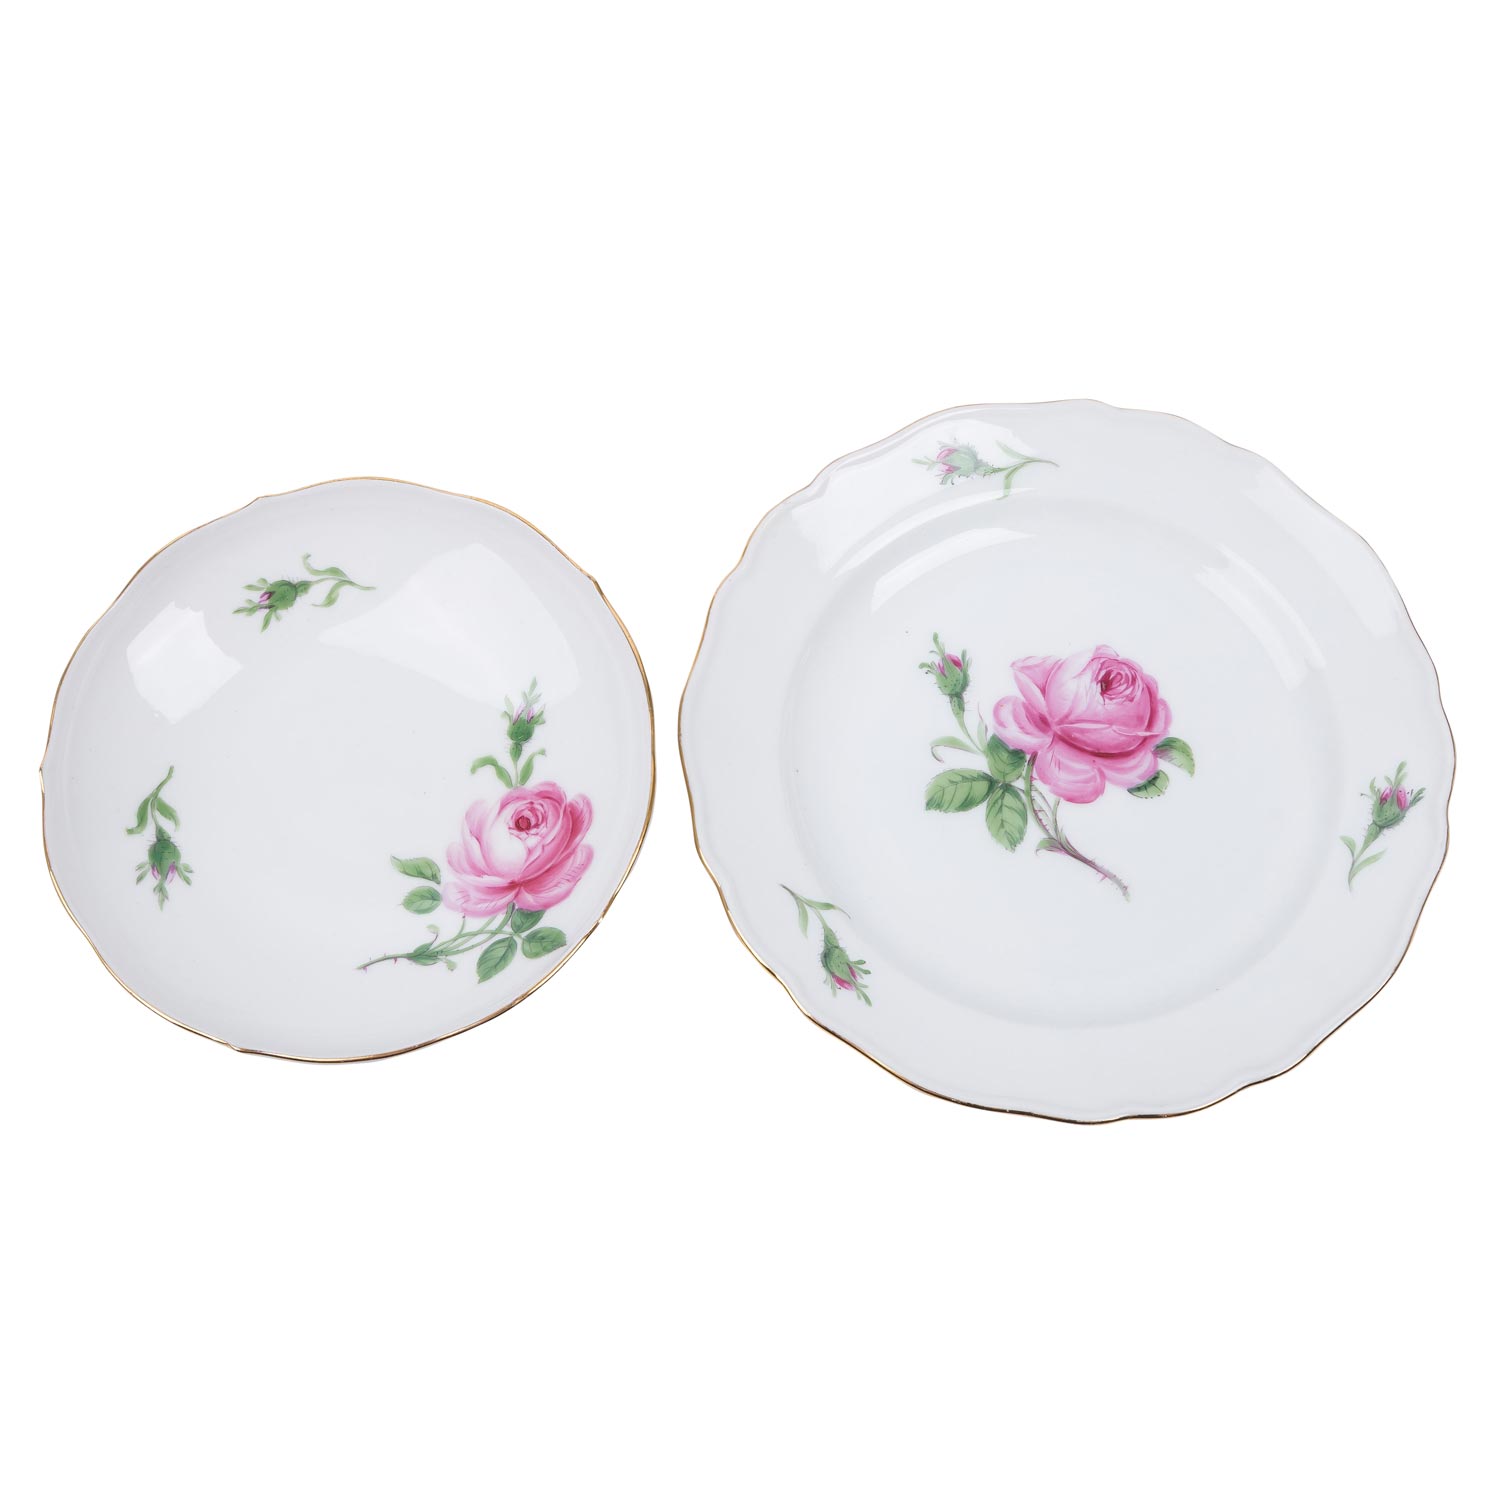 MEISSEN 5 Serviceteile 'Rote Rose', 2. Wahl, 20. Jh. - Image 2 of 5